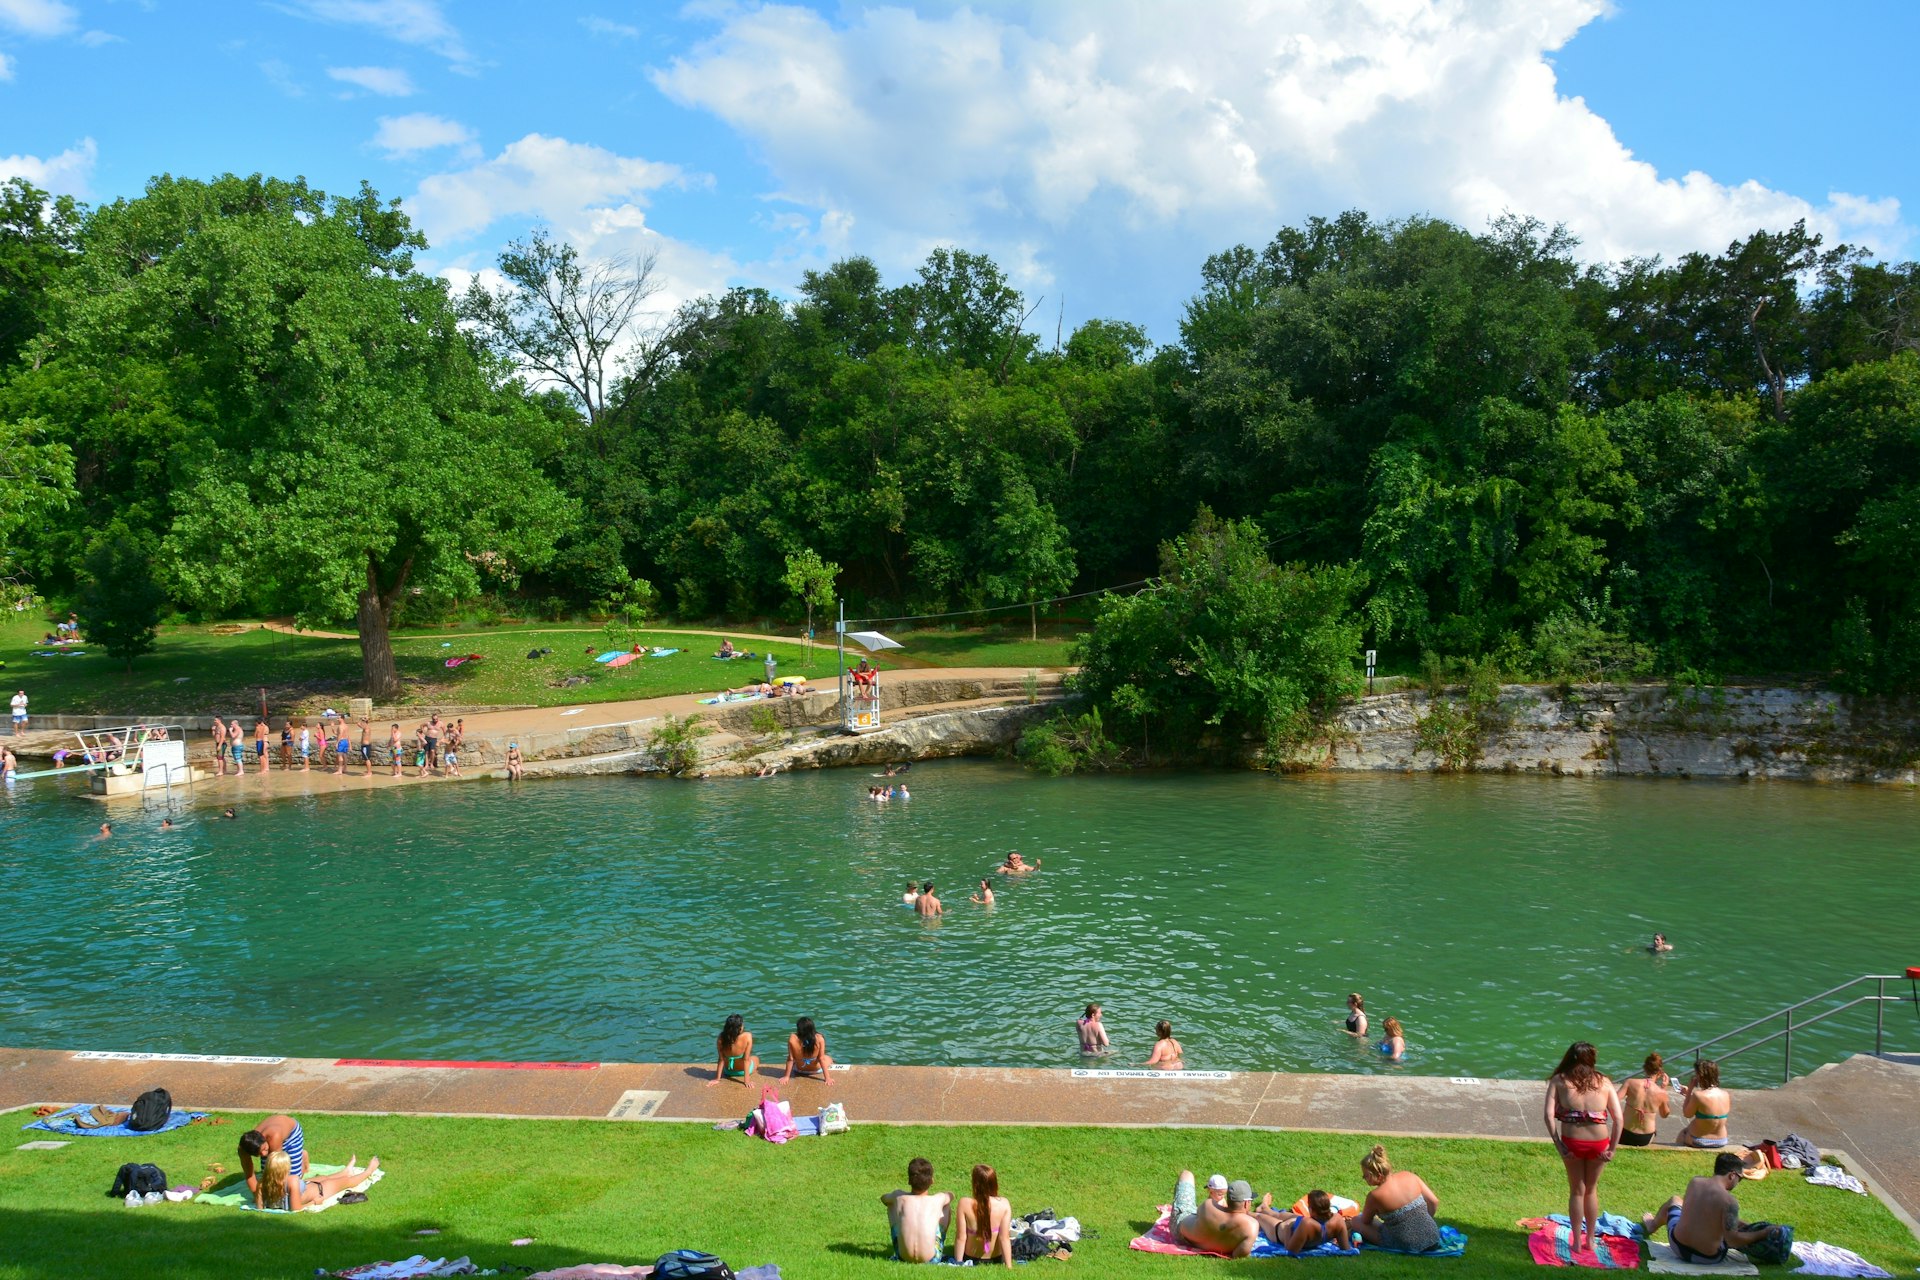 A natural pool with people swimming and green trees around